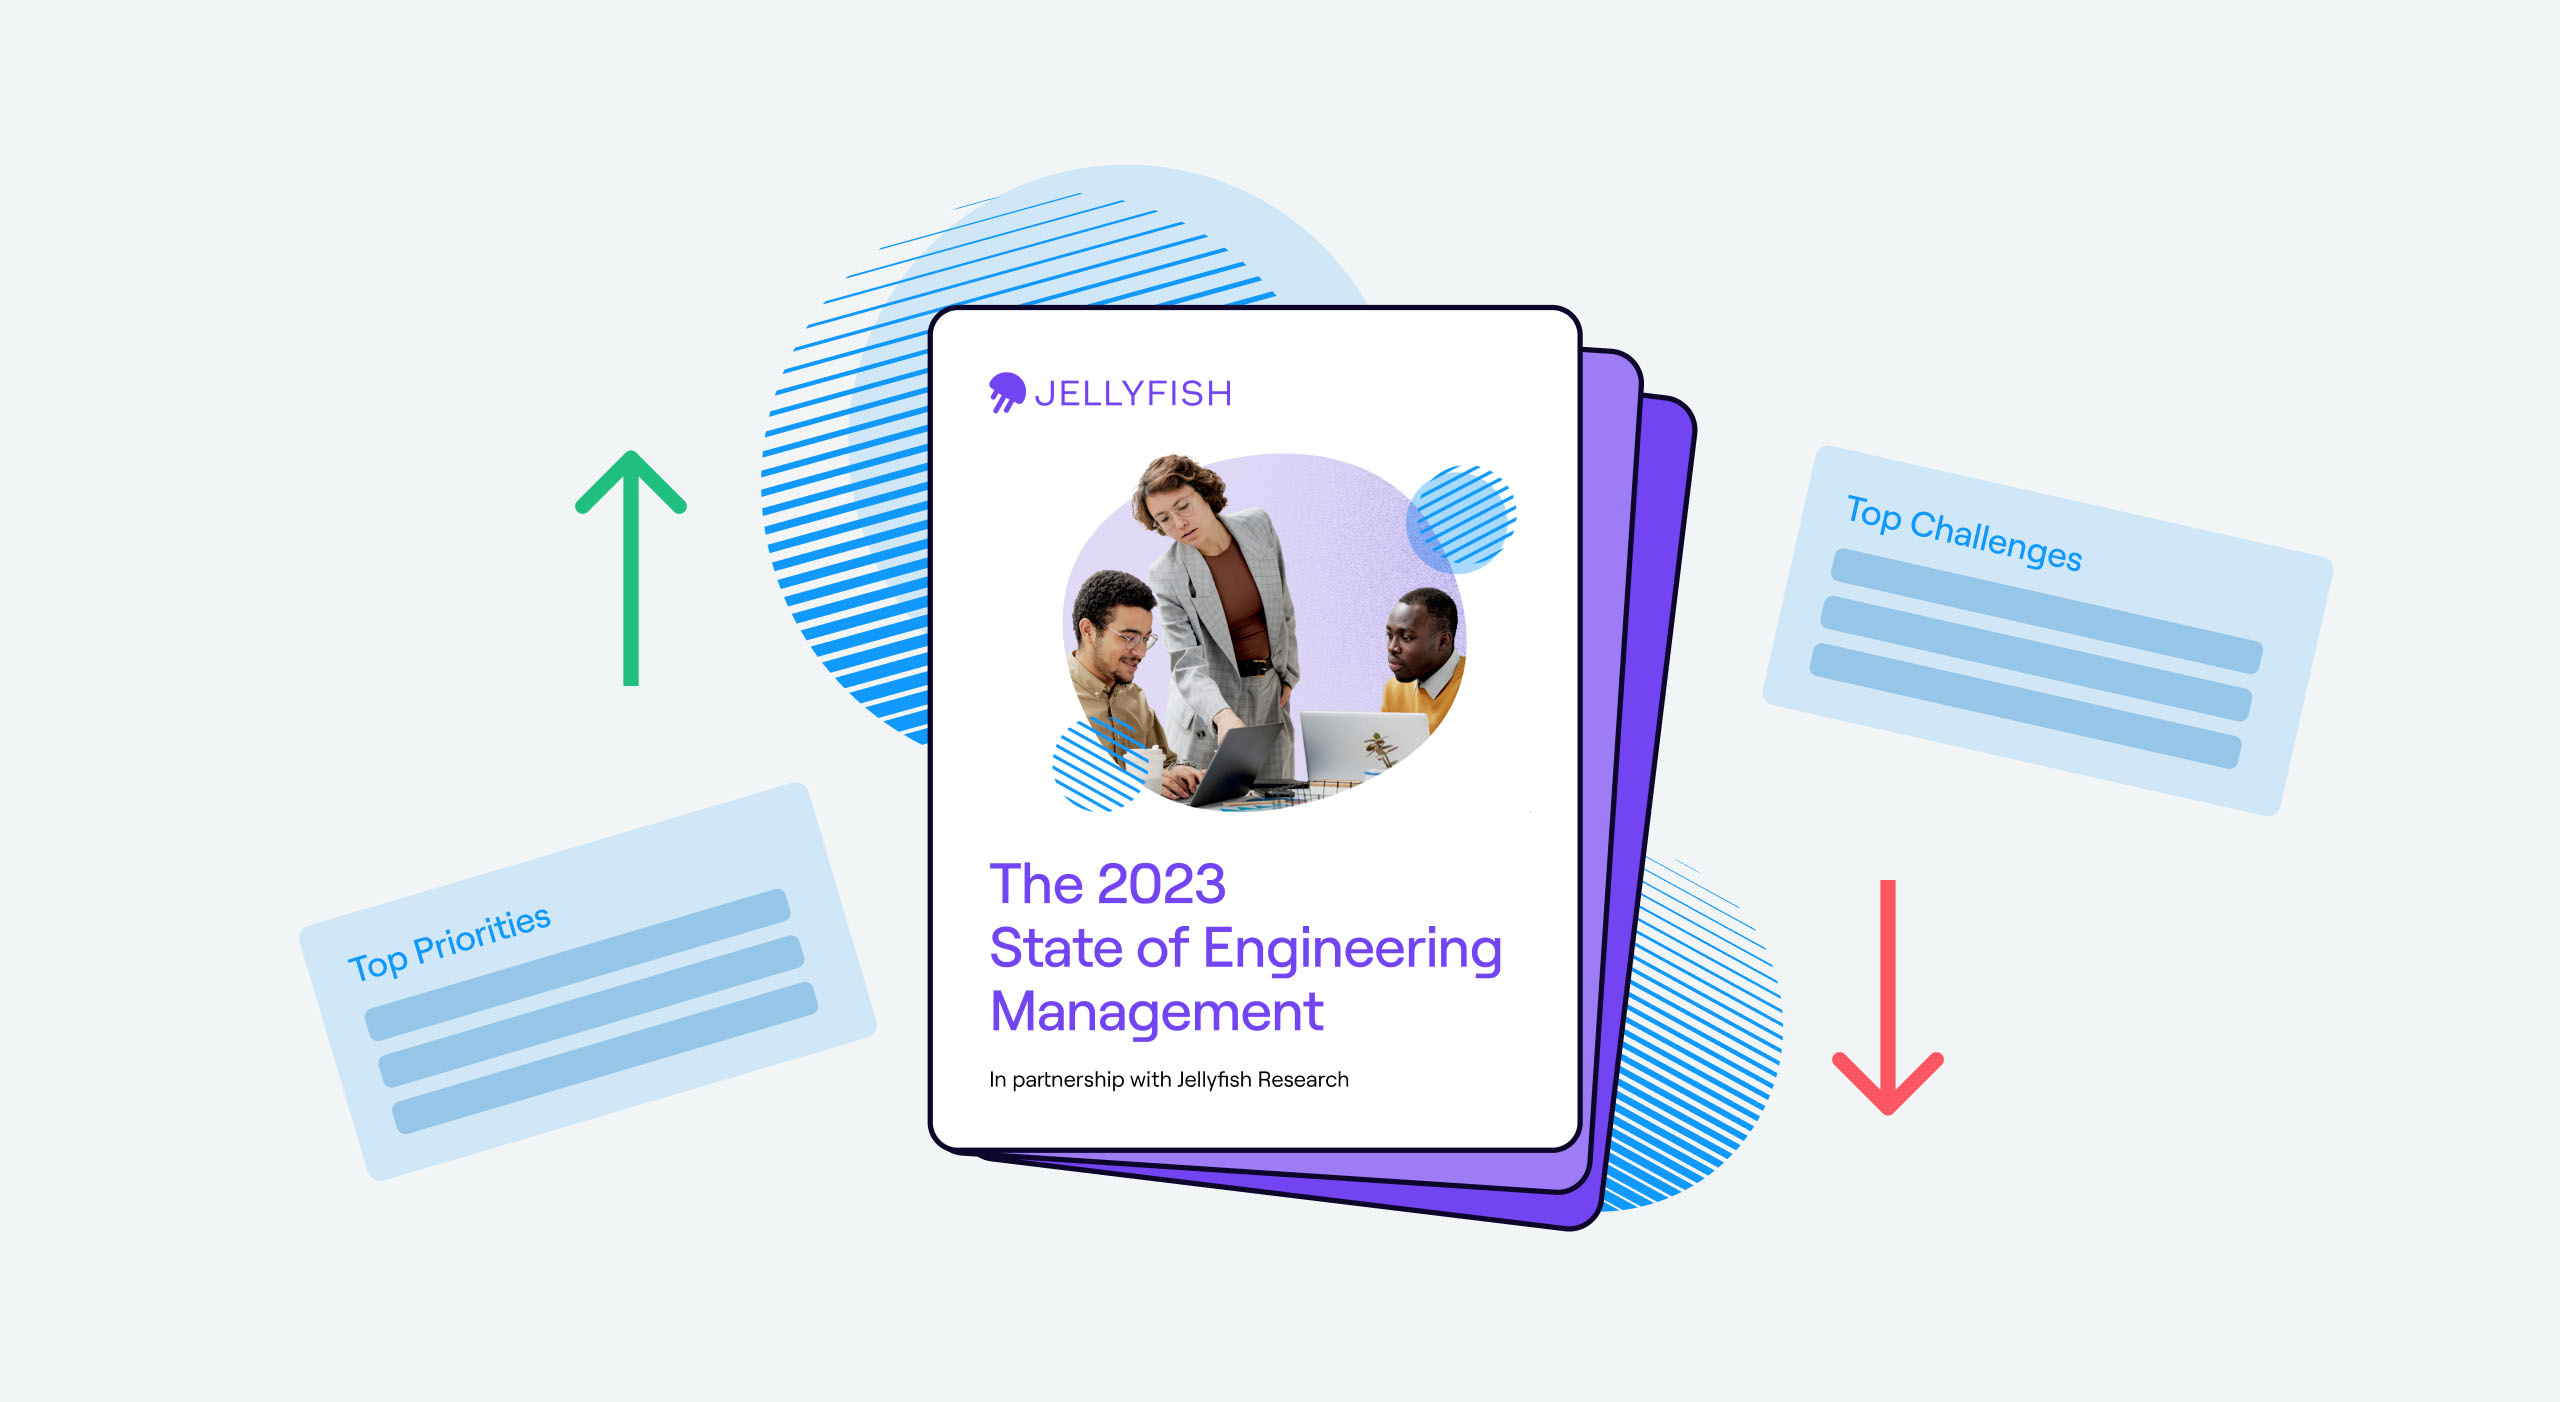 Key Takeaways from the State of Engineering Management Report